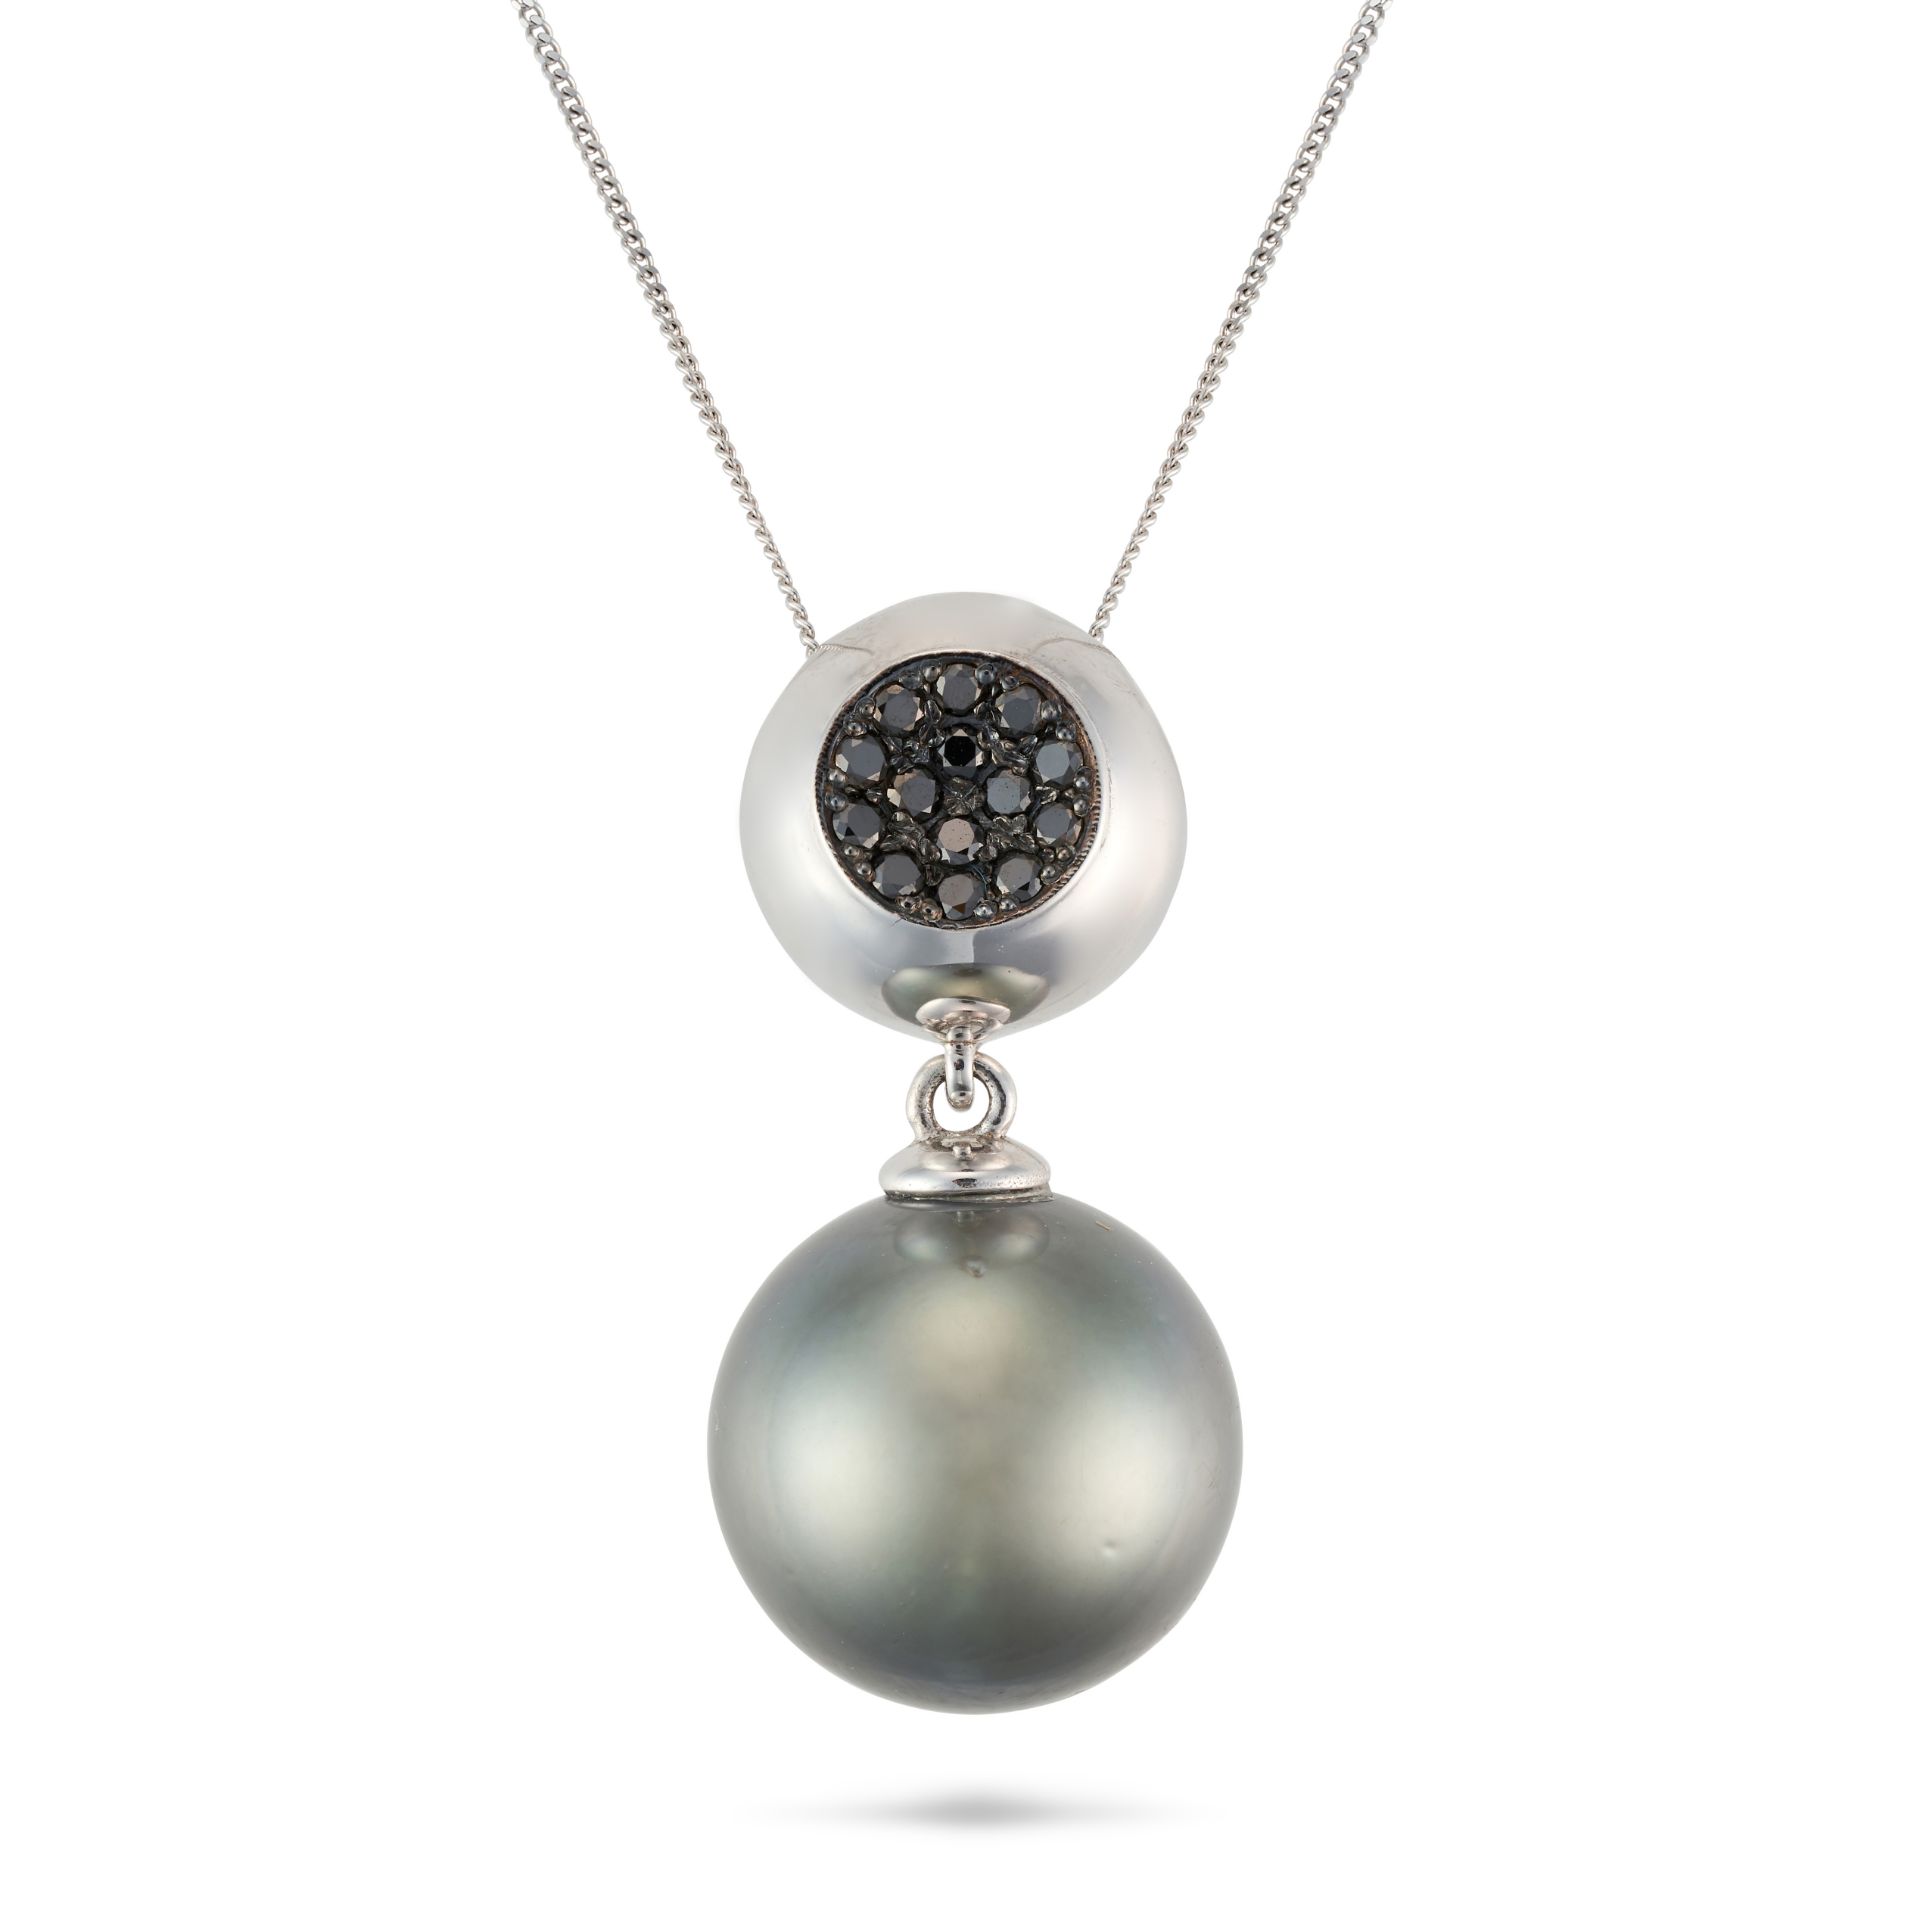 A TAHITIAN PEARL AND BLACK DIAMOND PENDANT NECKLACE in 18ct white gold, the pendant set with a cl...